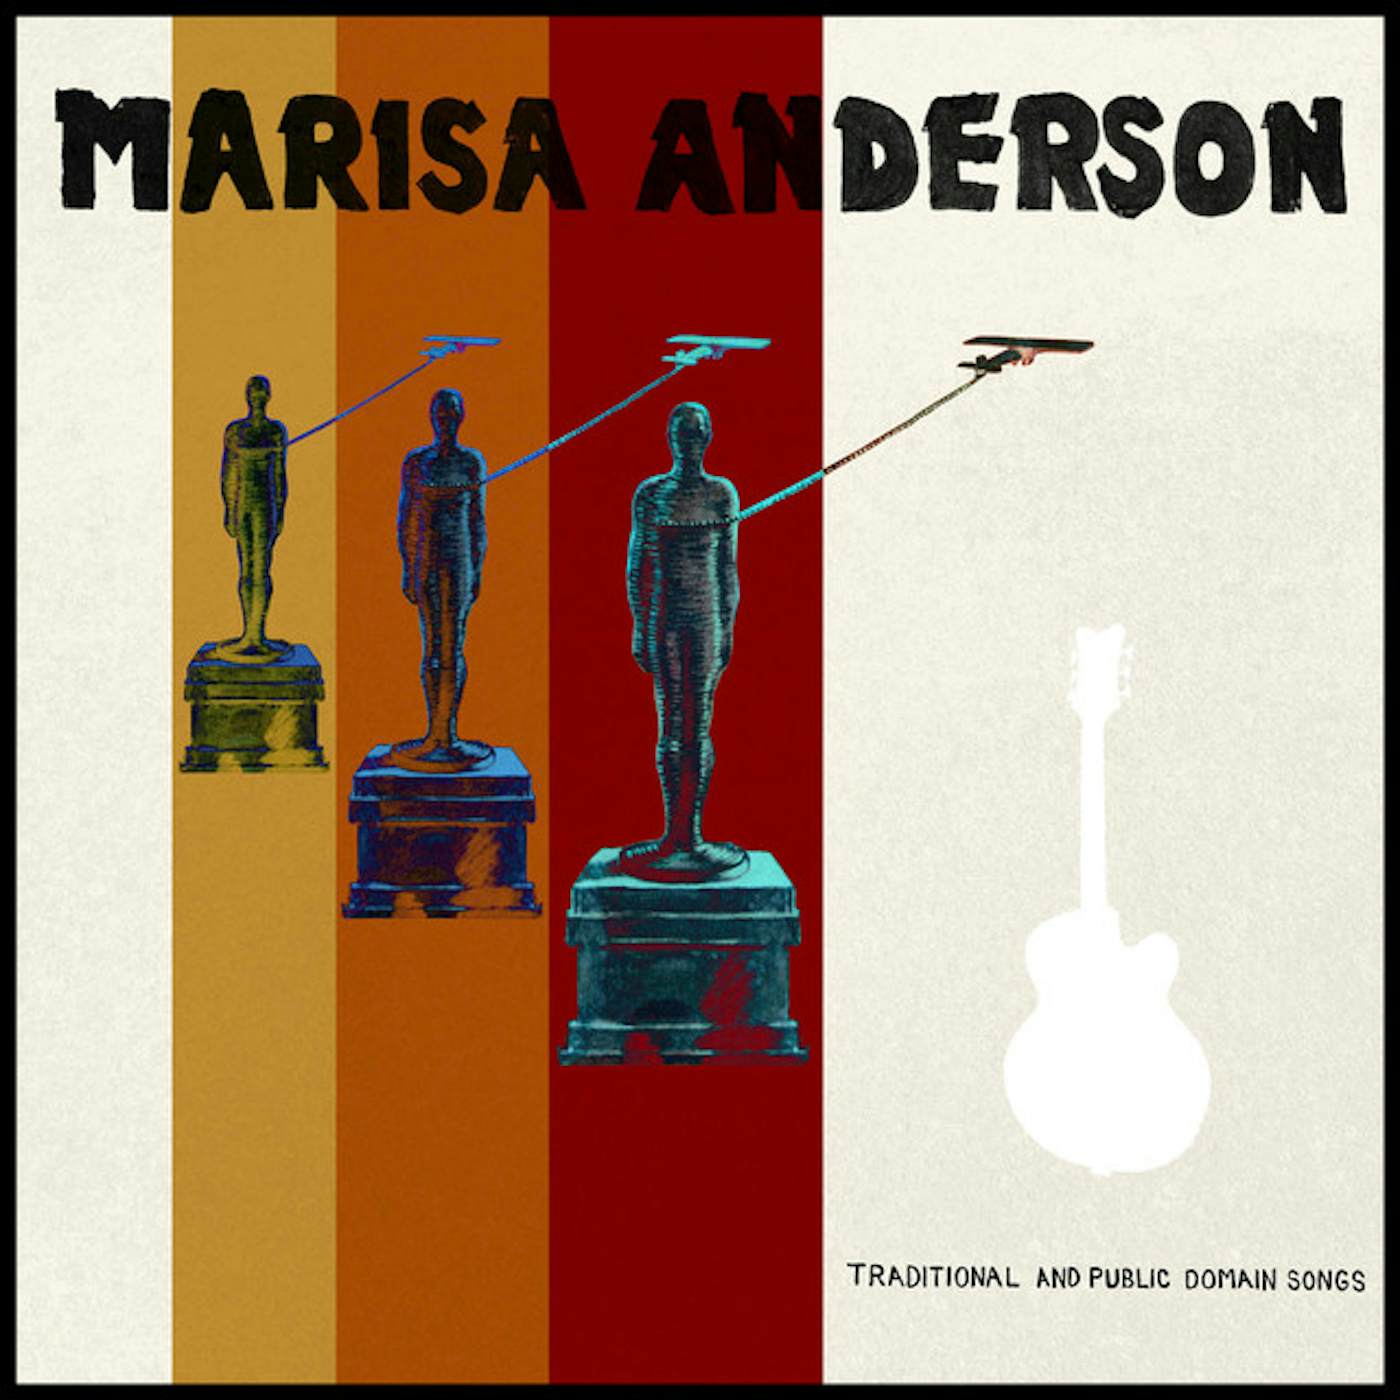 Marisa Anderson Traditional and Public Domain Songs Vinyl Record